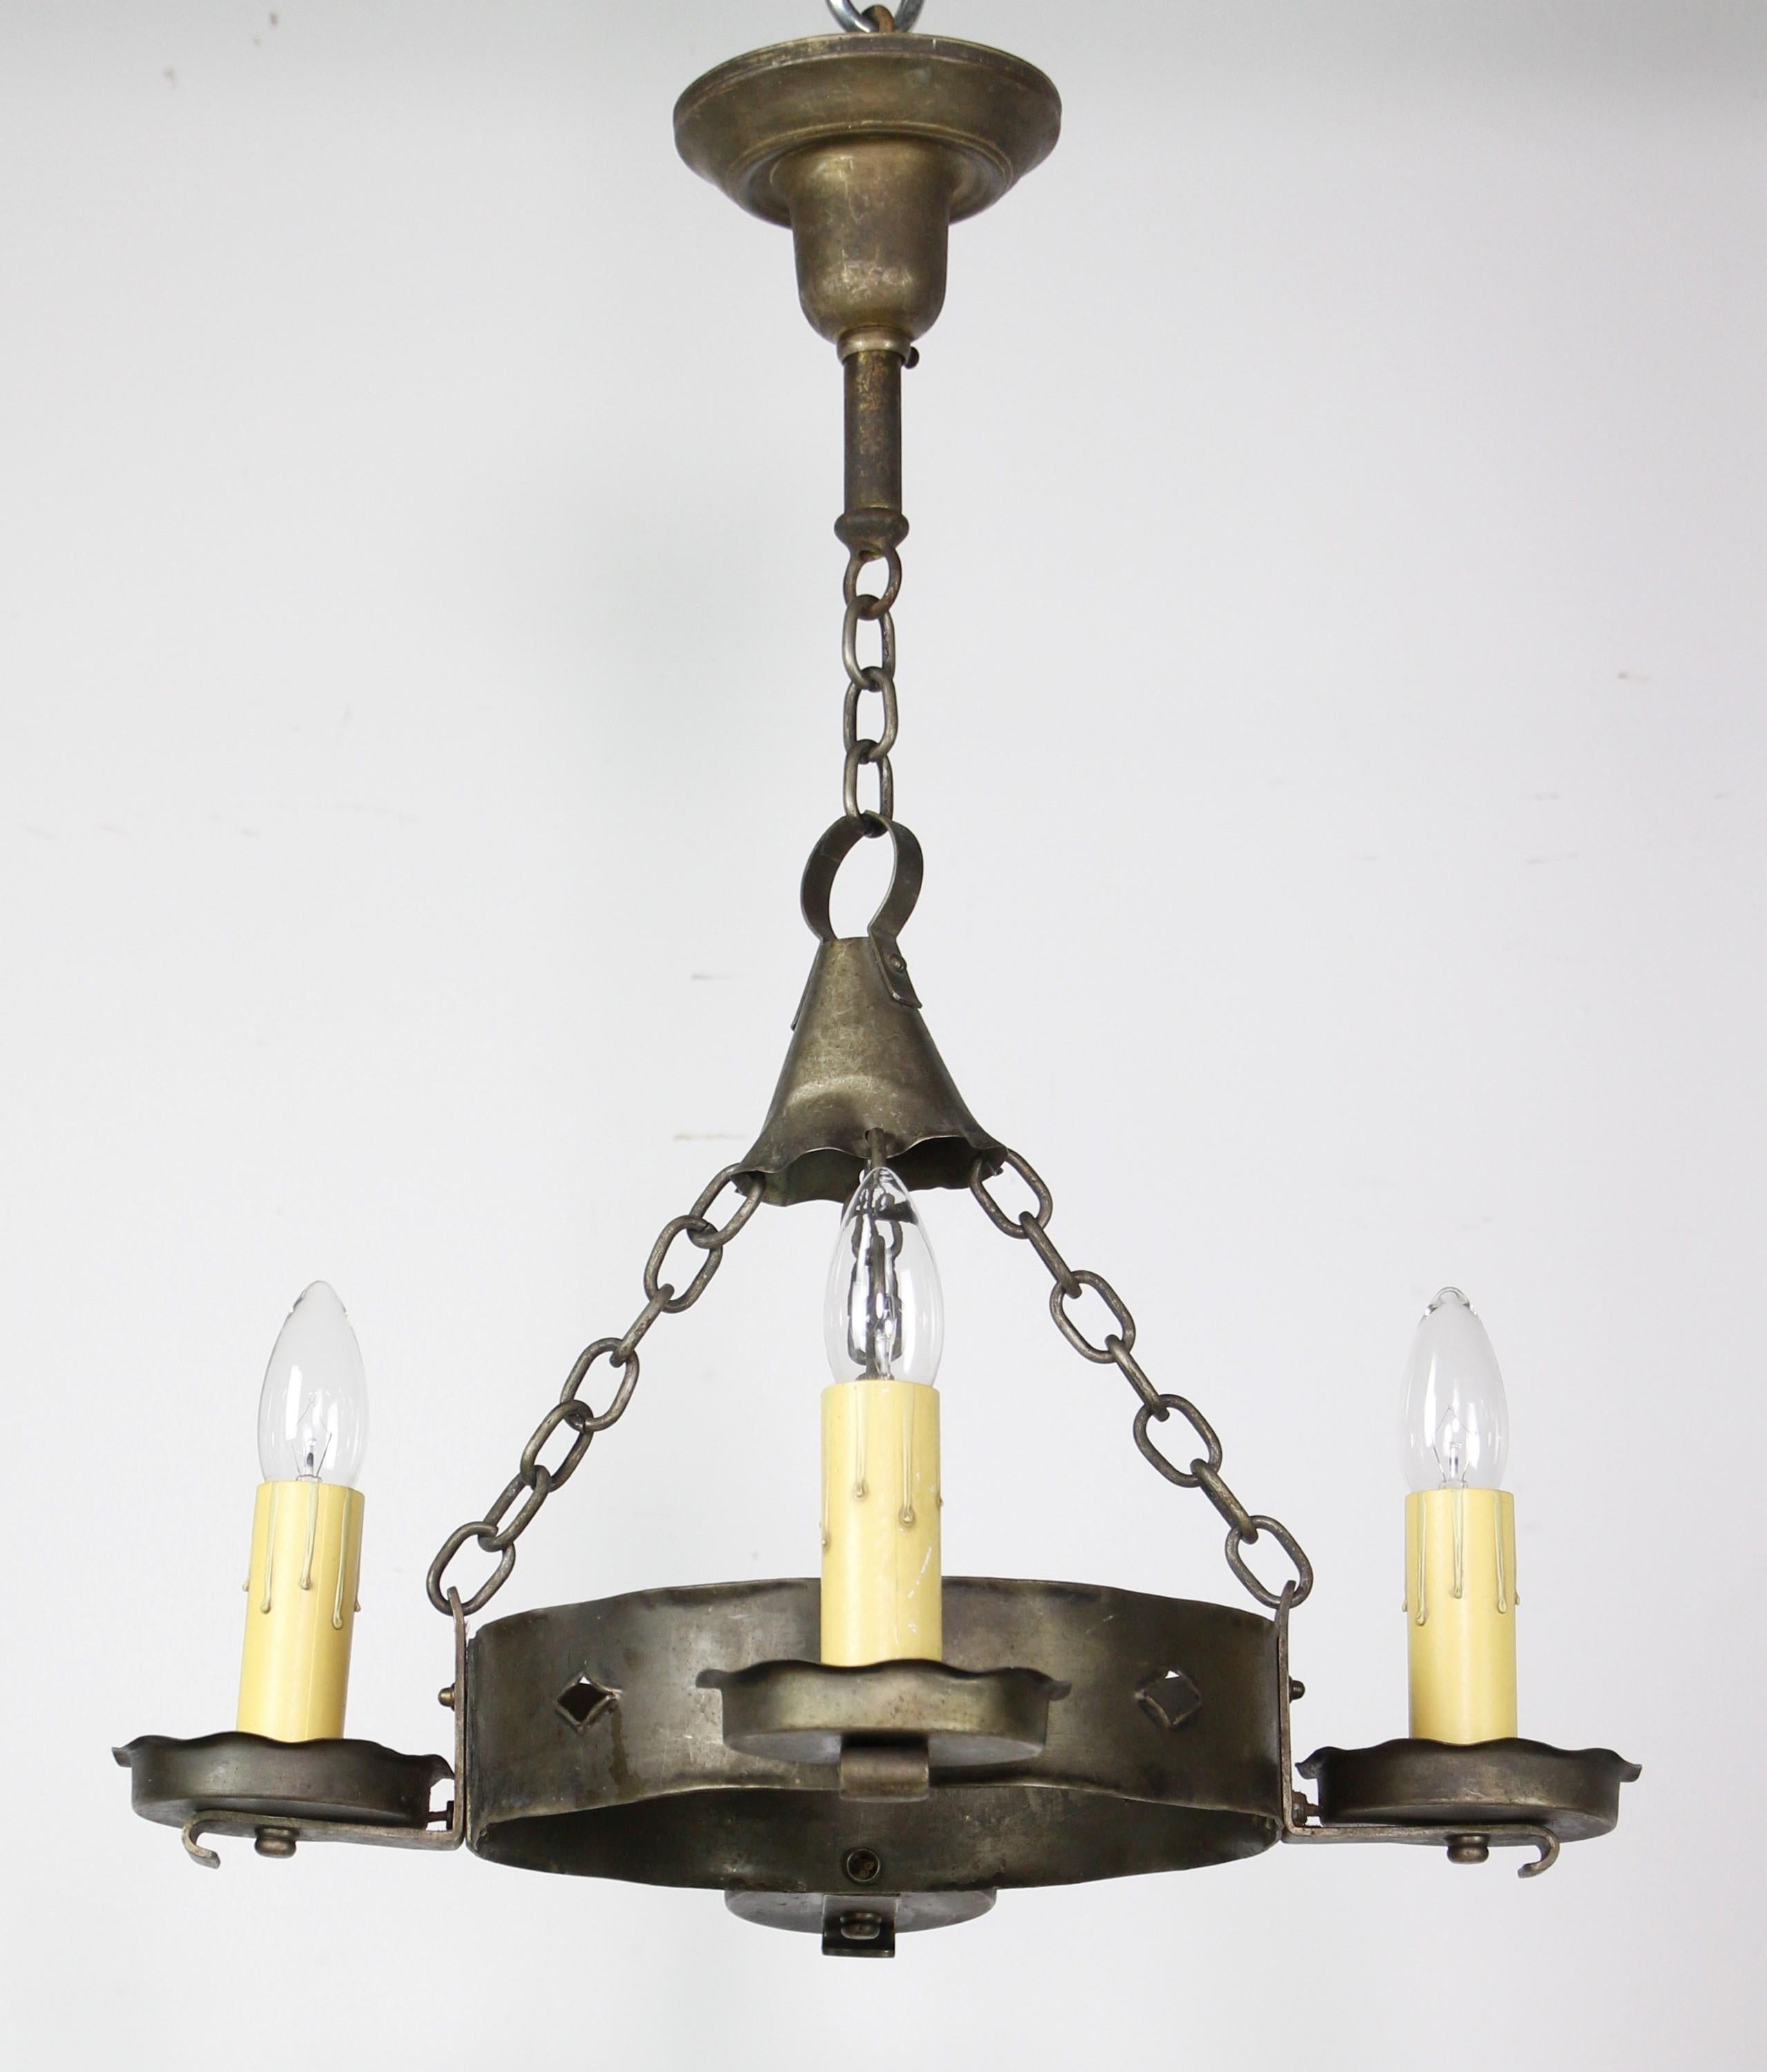 Early 1900s Arts & Crafts hammered brass chandelier with four candlestick arm lights.  This original chandelier has a round hammered wheel holding the 4 arms and is supported by a chain fitter.  The brass has a darkened patina.  The price includes